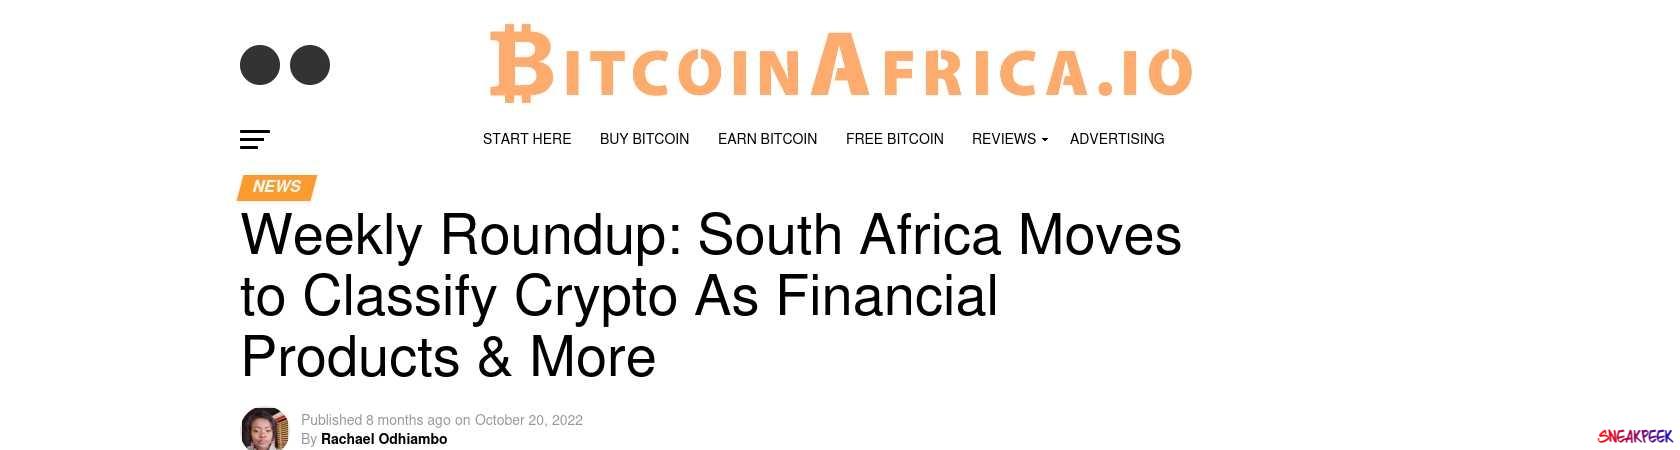 Read the full Article:  ⭲ Weekly Roundup: South Africa Moves to Classify Crypto As Financial Products & More